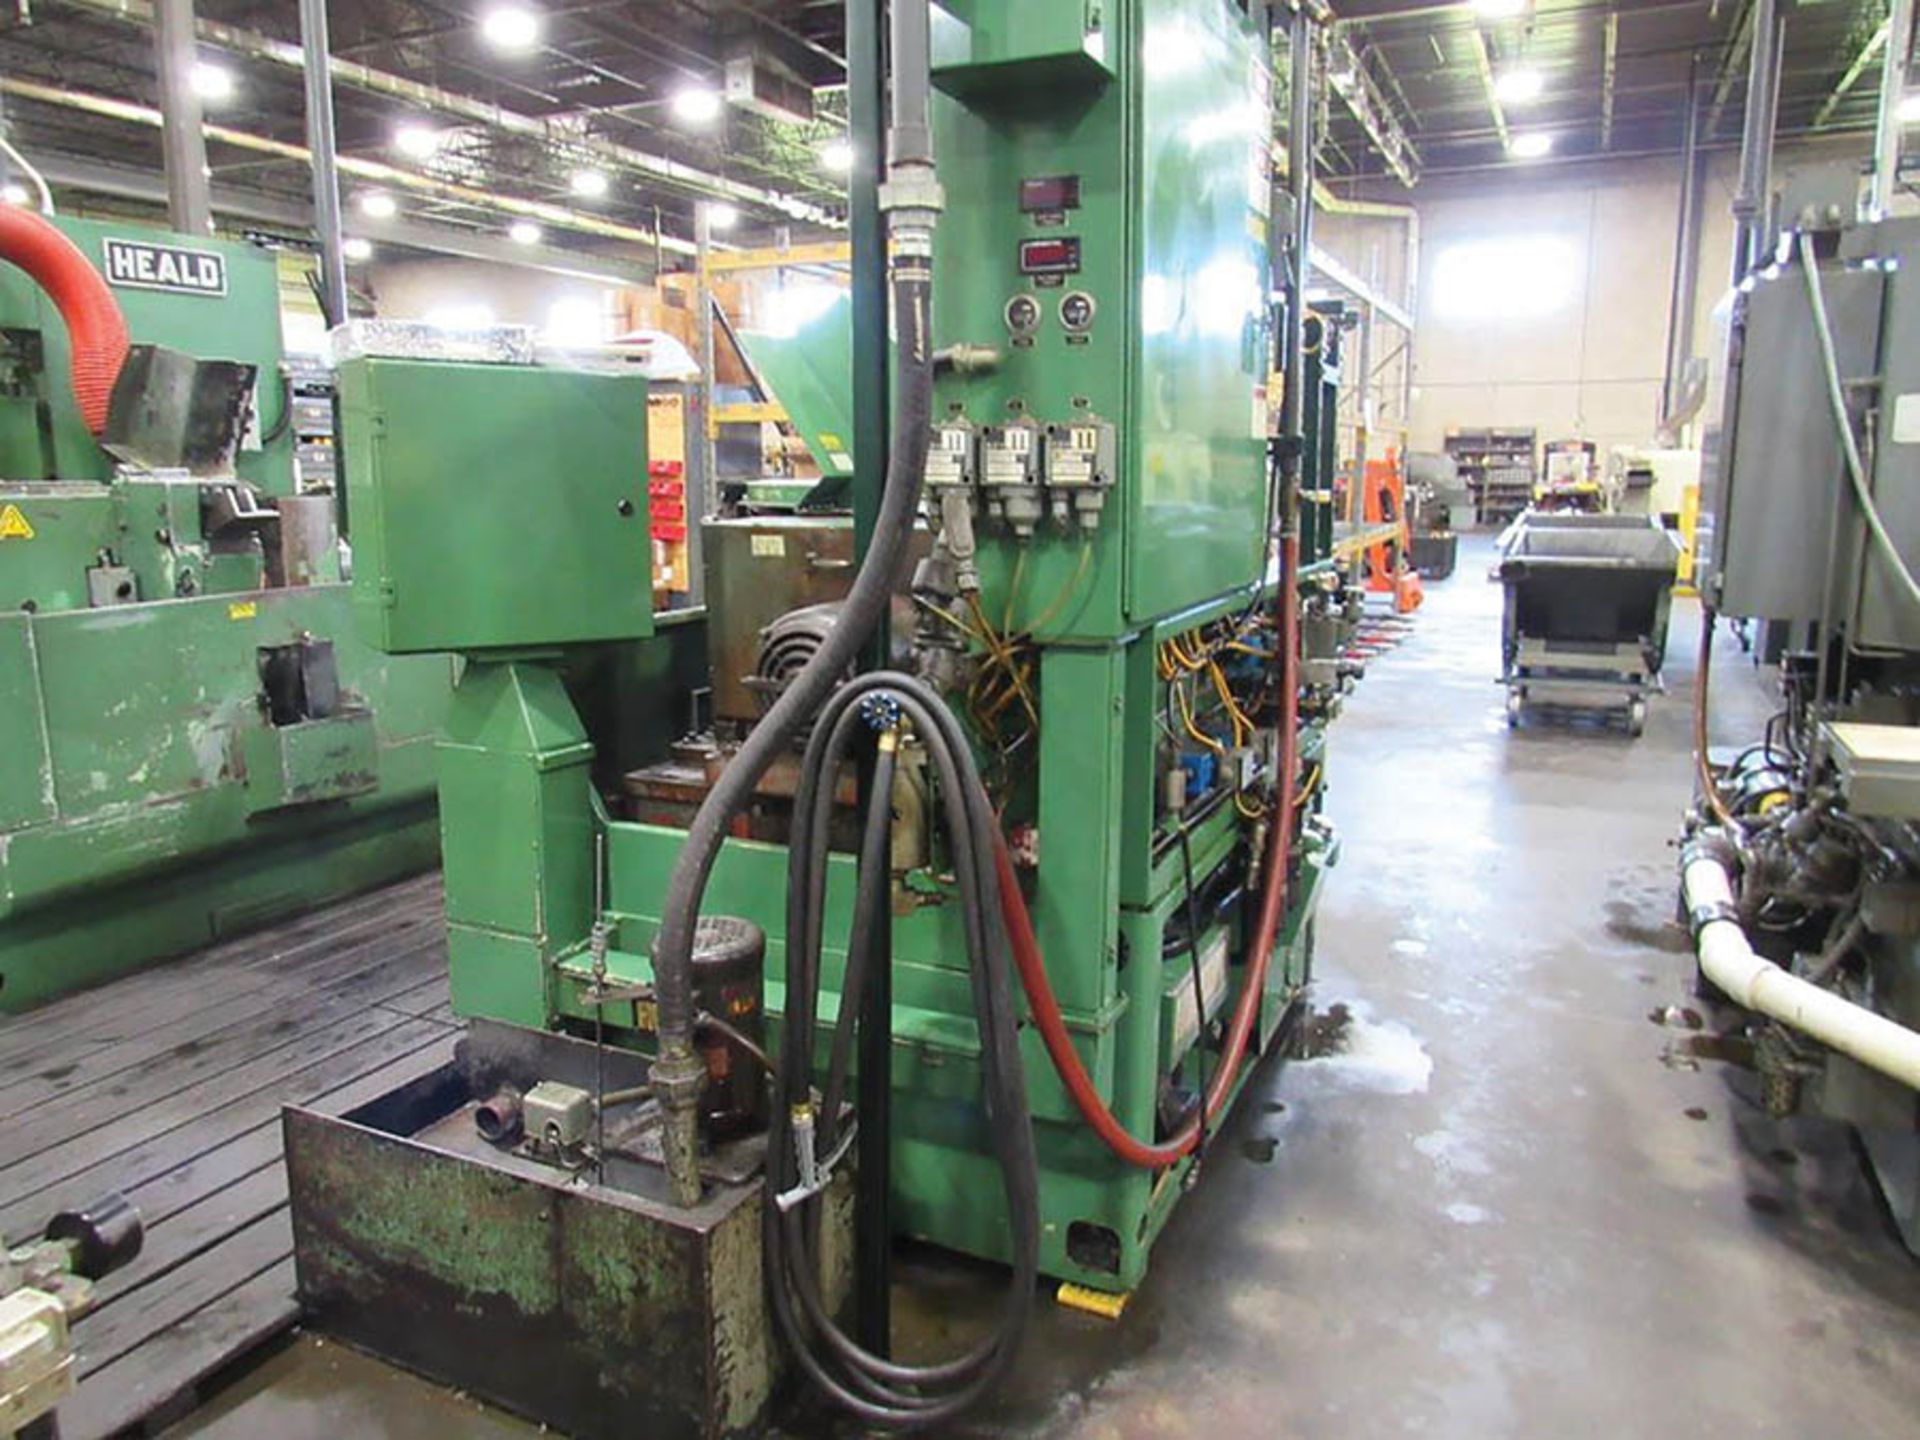 MCGILL HEALD CNC AUTO LOAD BORE GRINDER MODEL 1-CF-70, MOTOR DRIVEN GRINDING & UNIVERSAL WORK HEADS, - Image 5 of 6